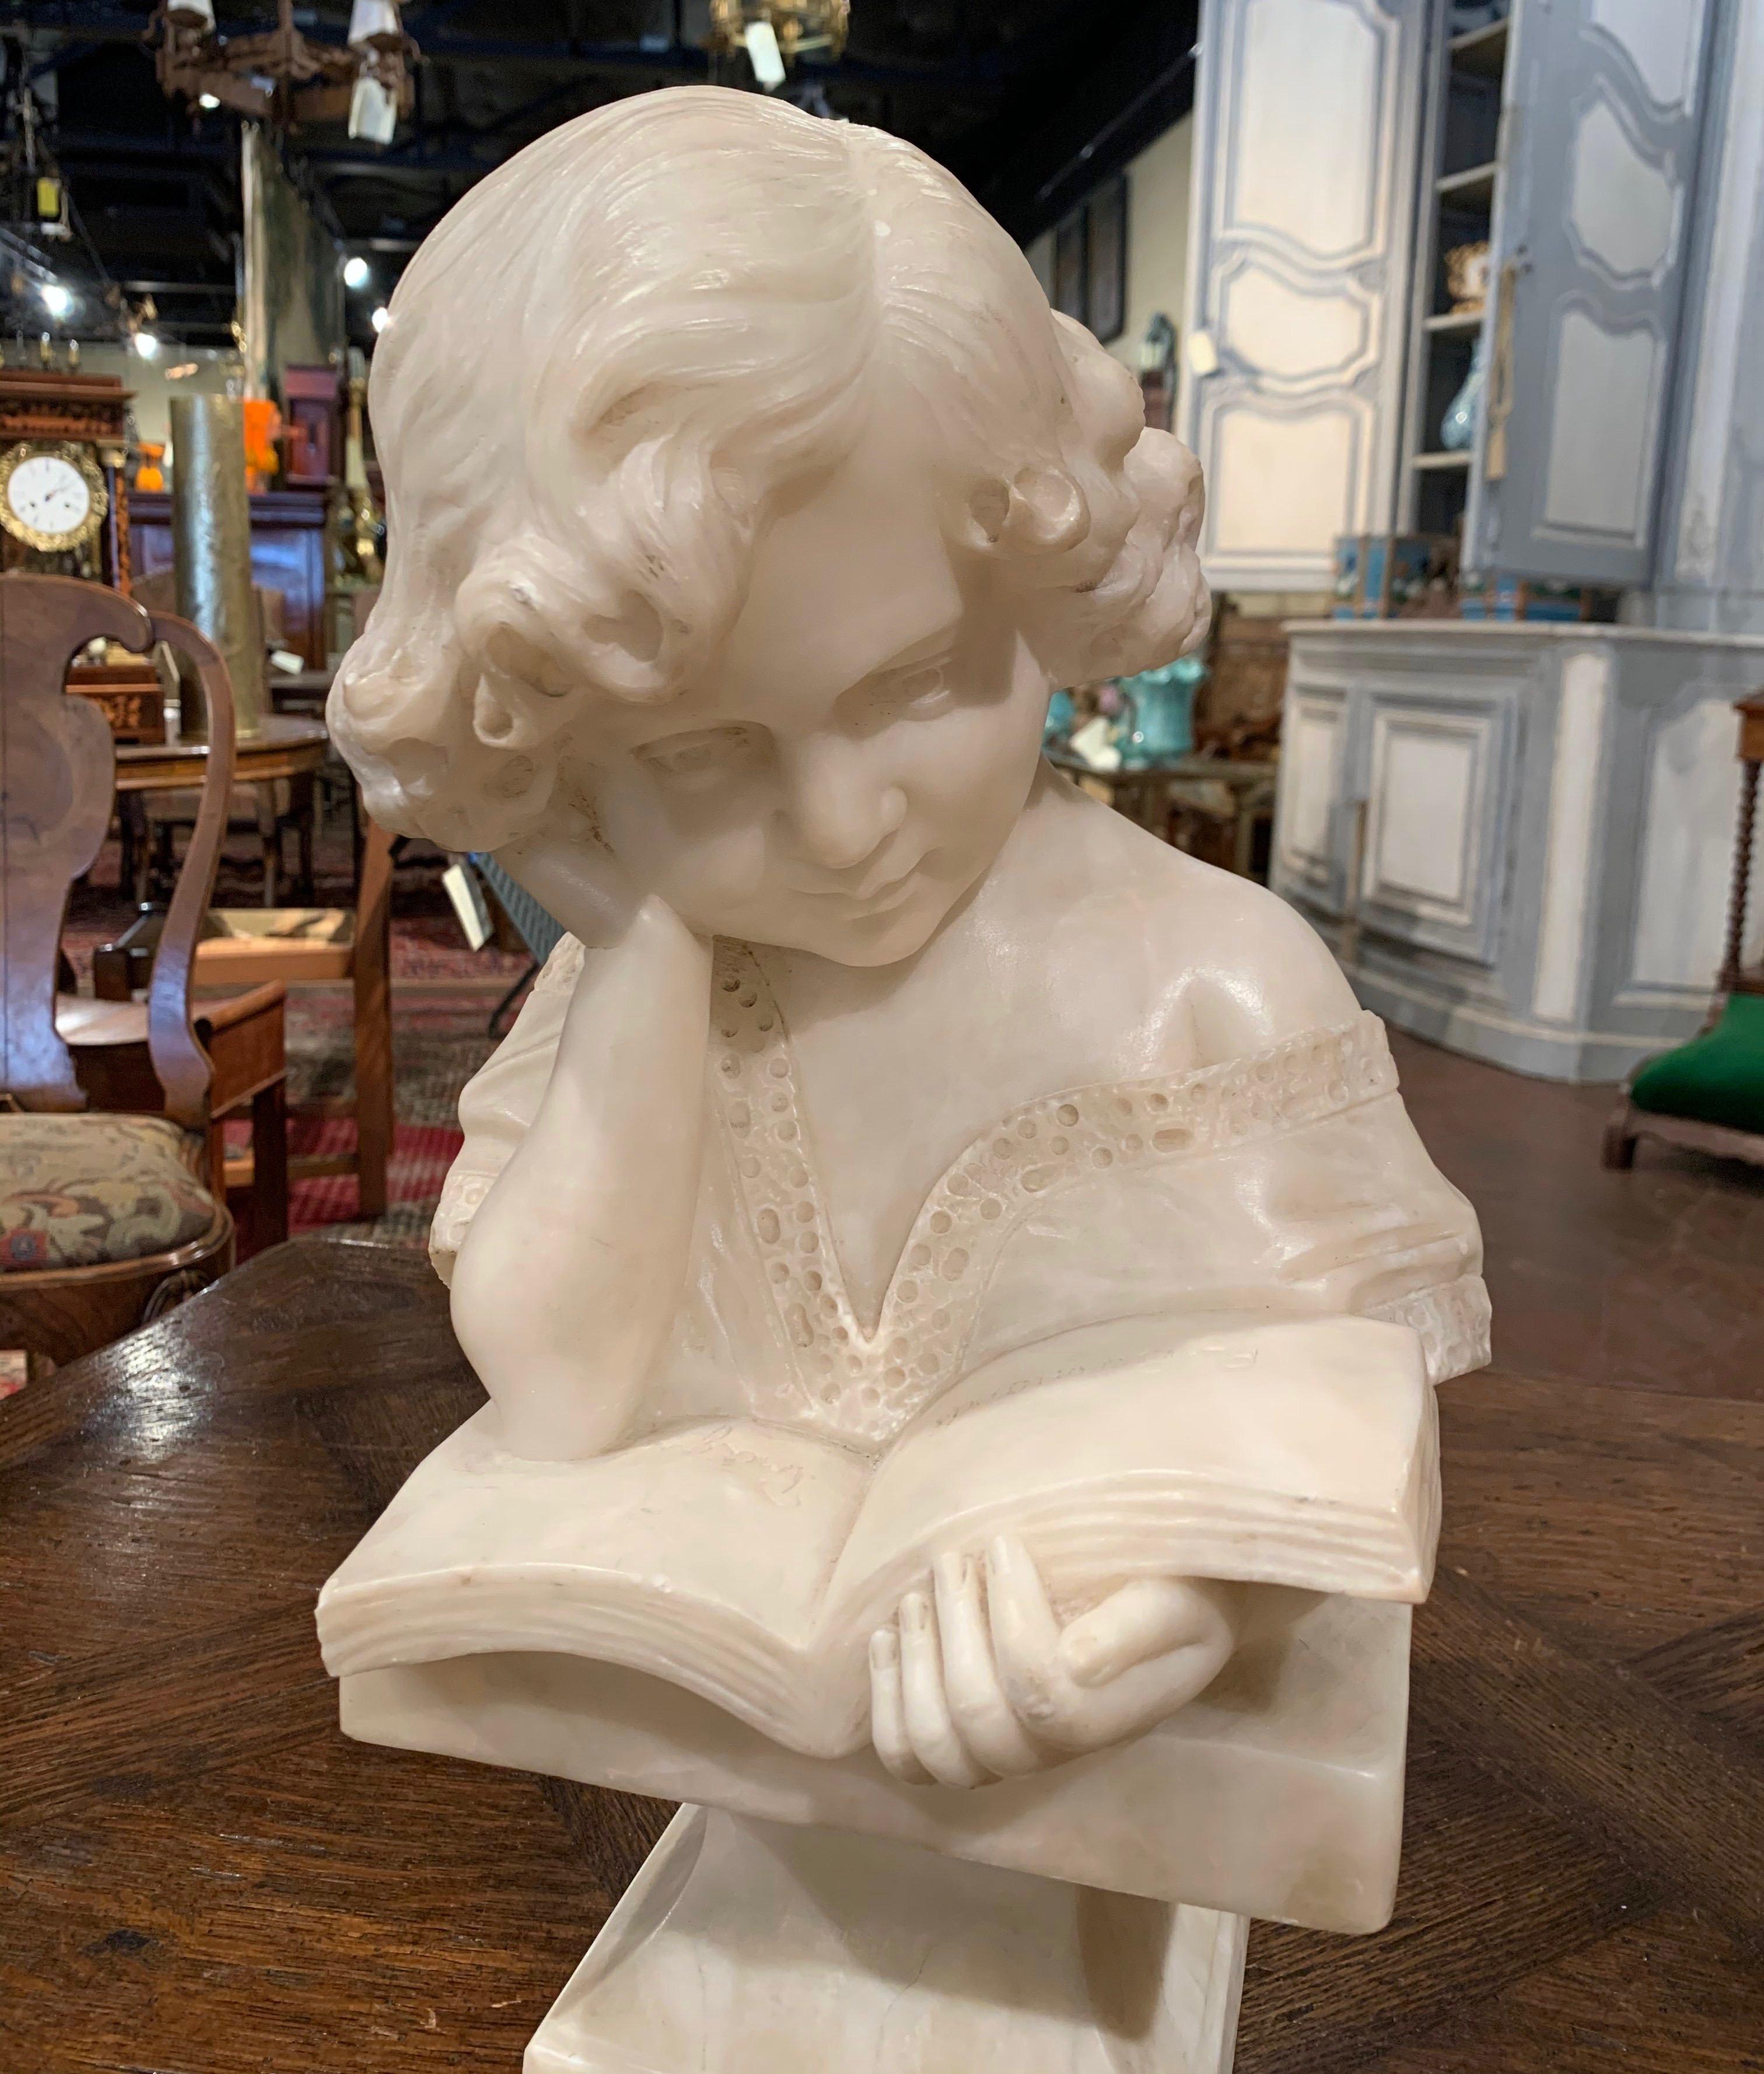 Hand-Carved 19th Century Italian Carved Marble Bust of a Young Girl Signed R. Bernardi Praga